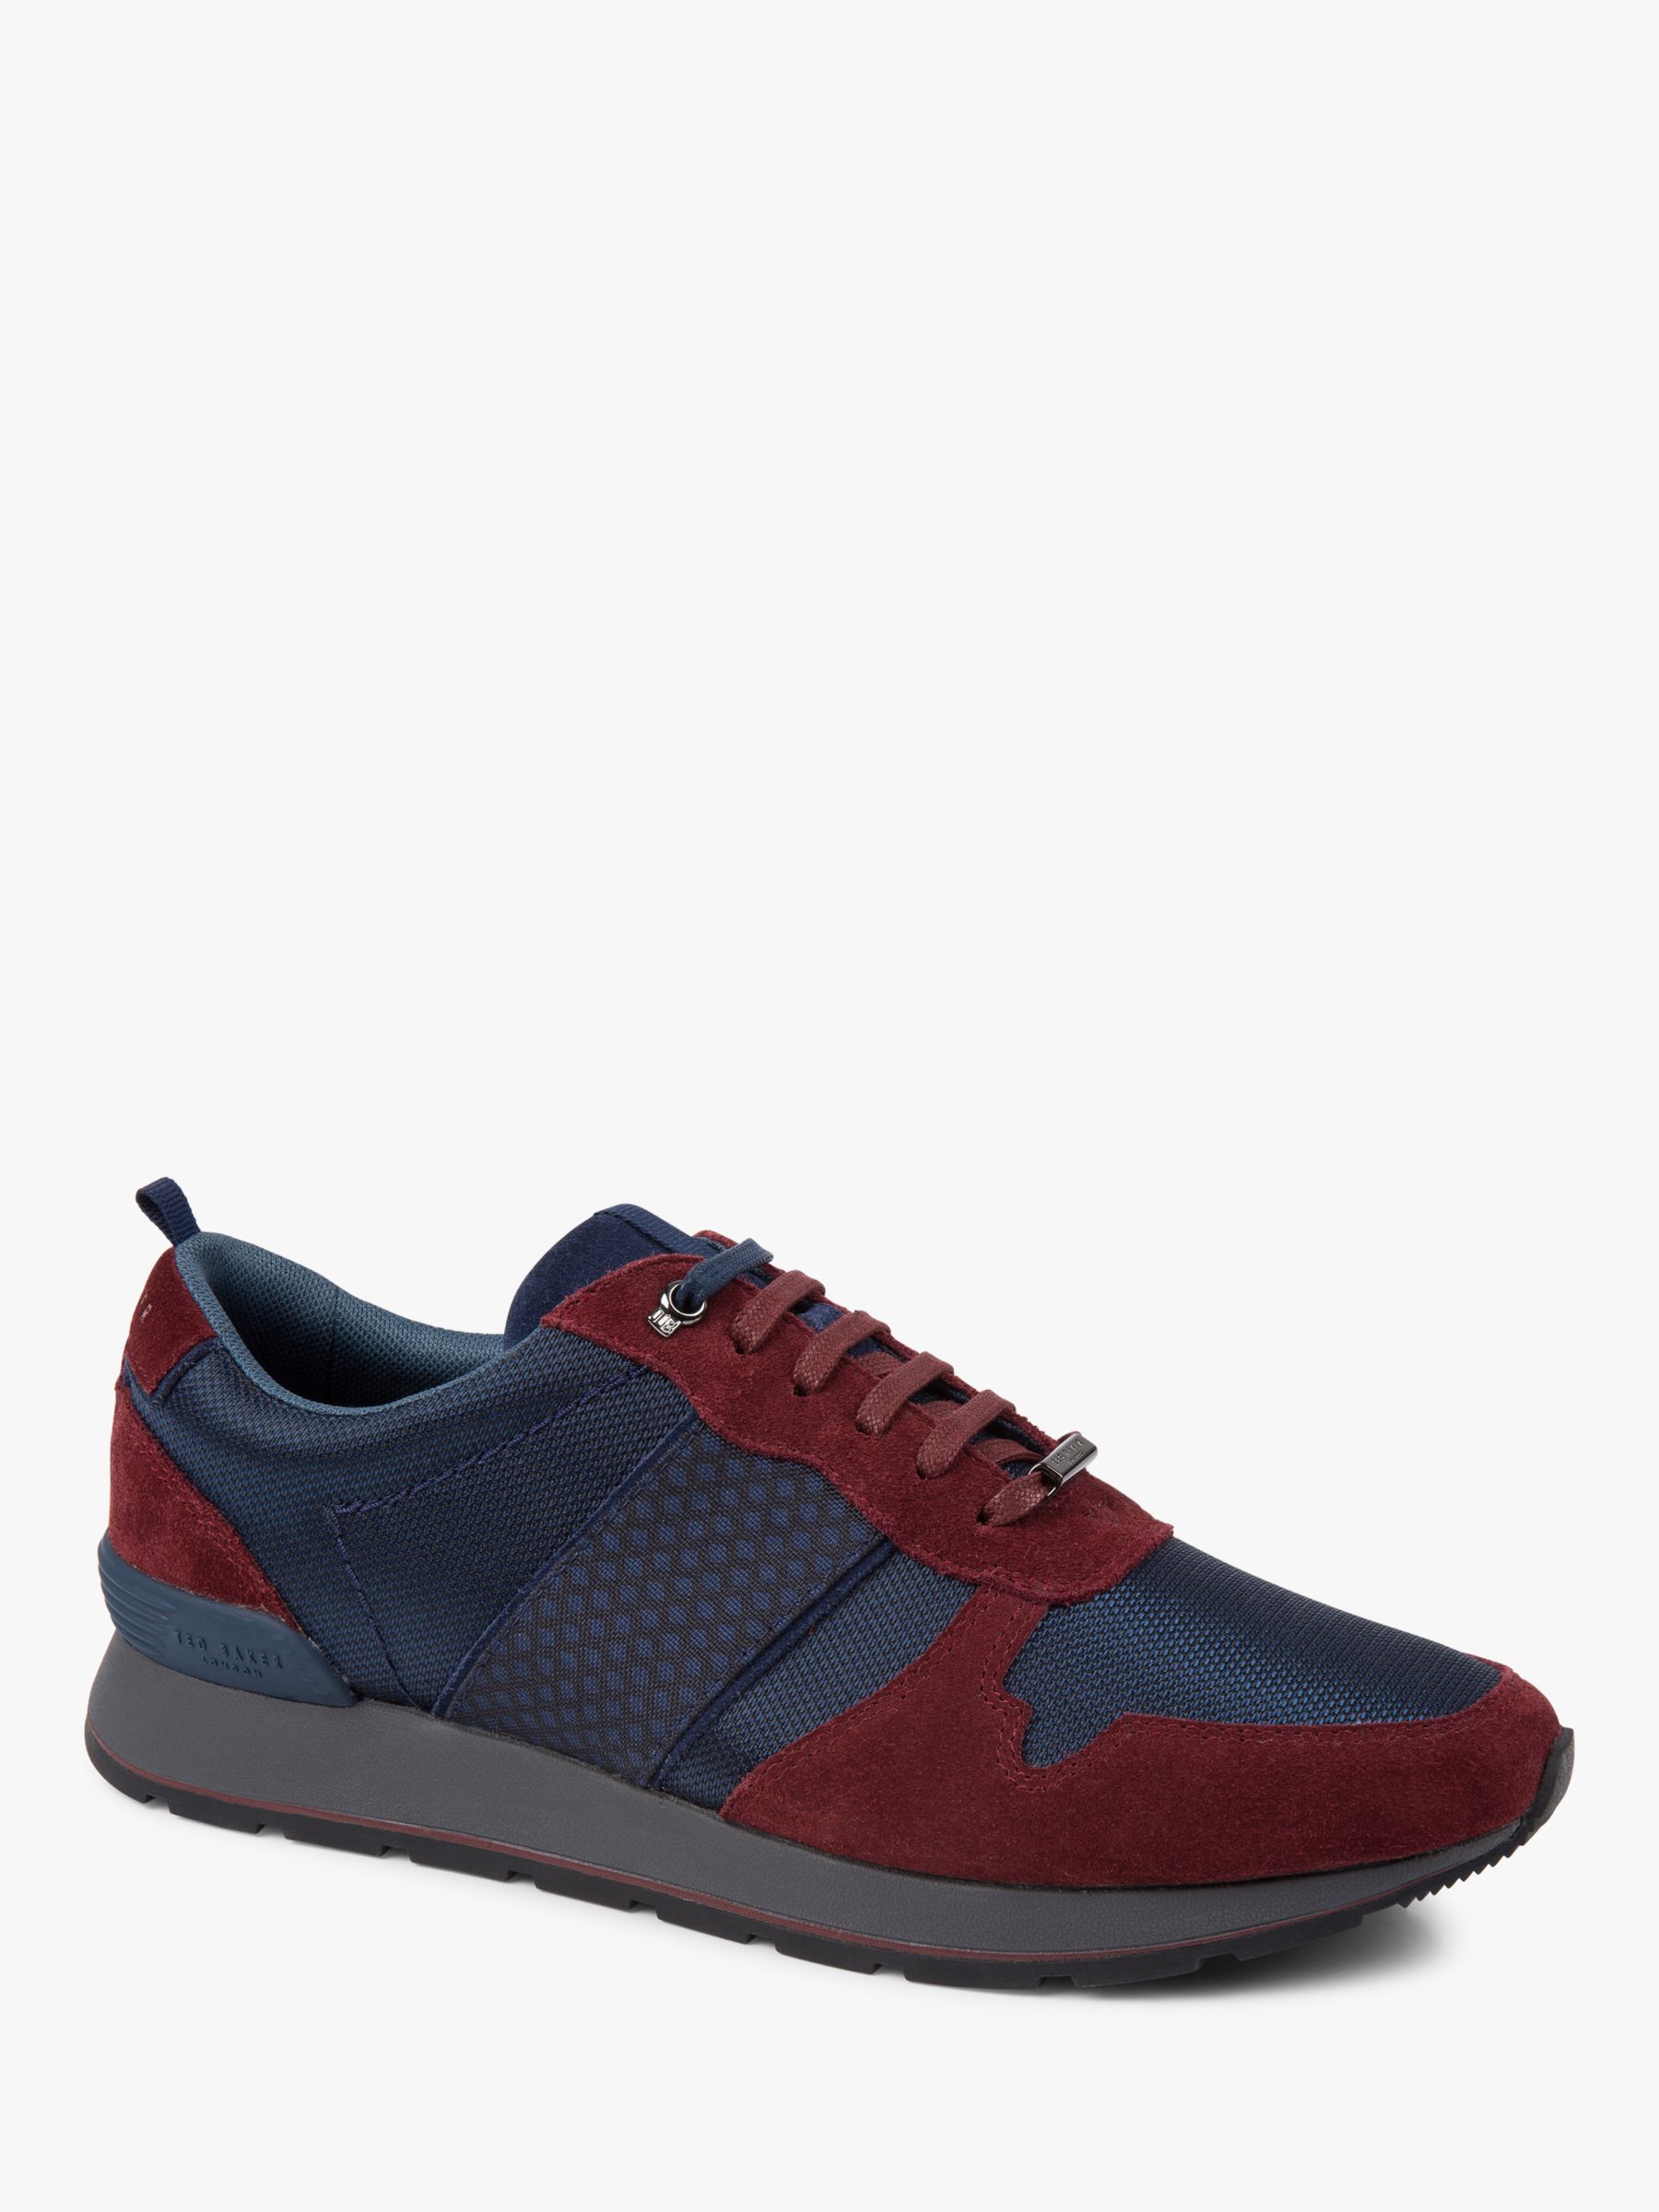 Ted Baker Jaymz Trainers, Blue/Dark Red